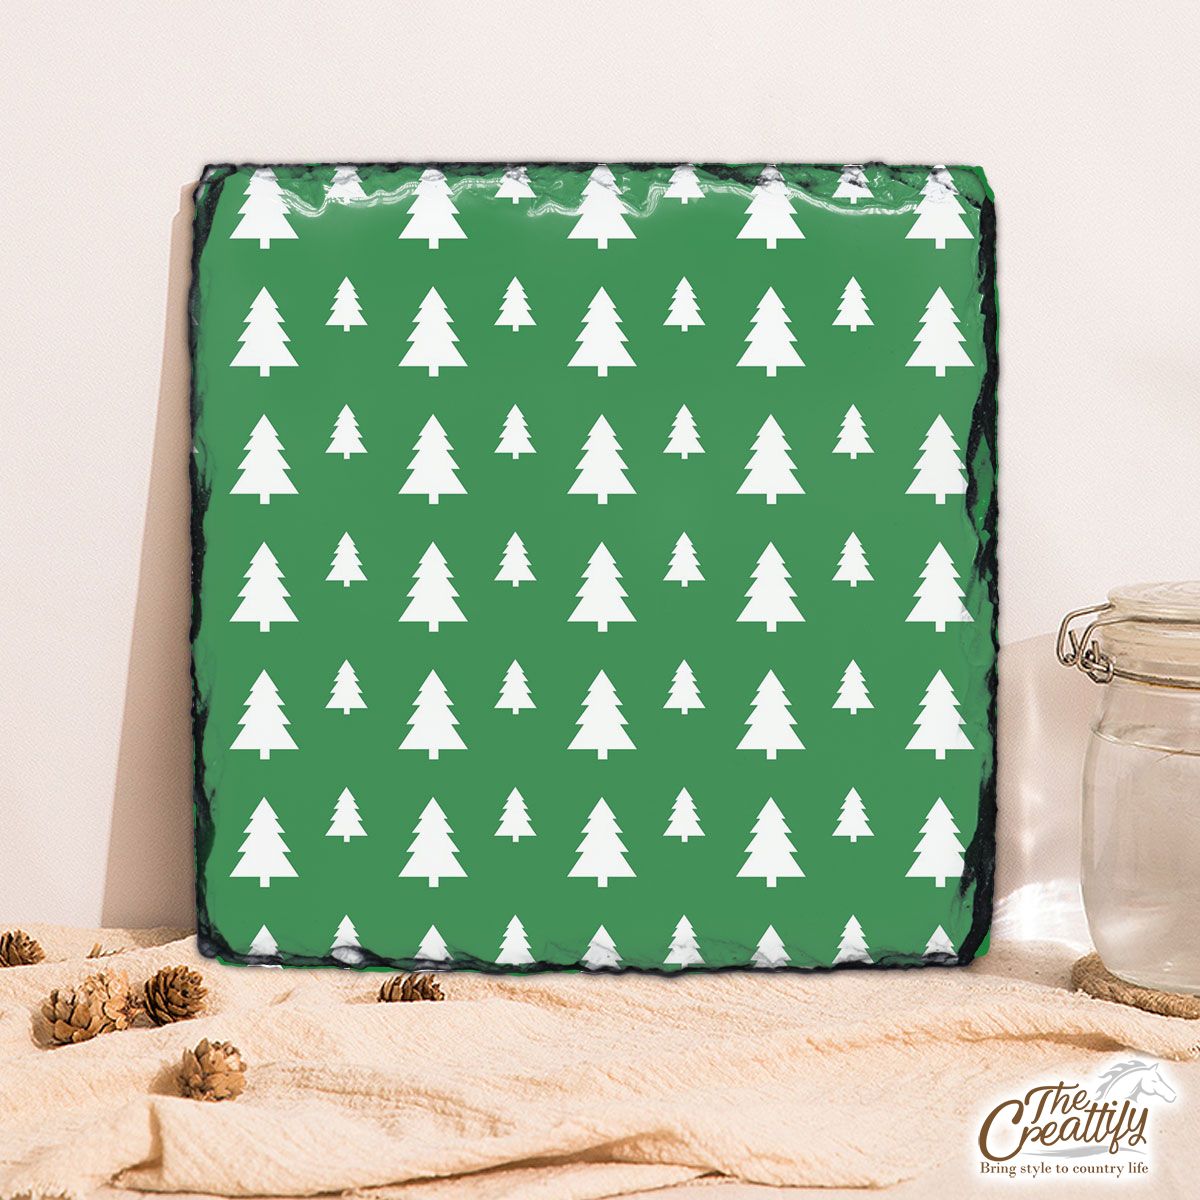 Green And White Christmas Tree Square Lithograph